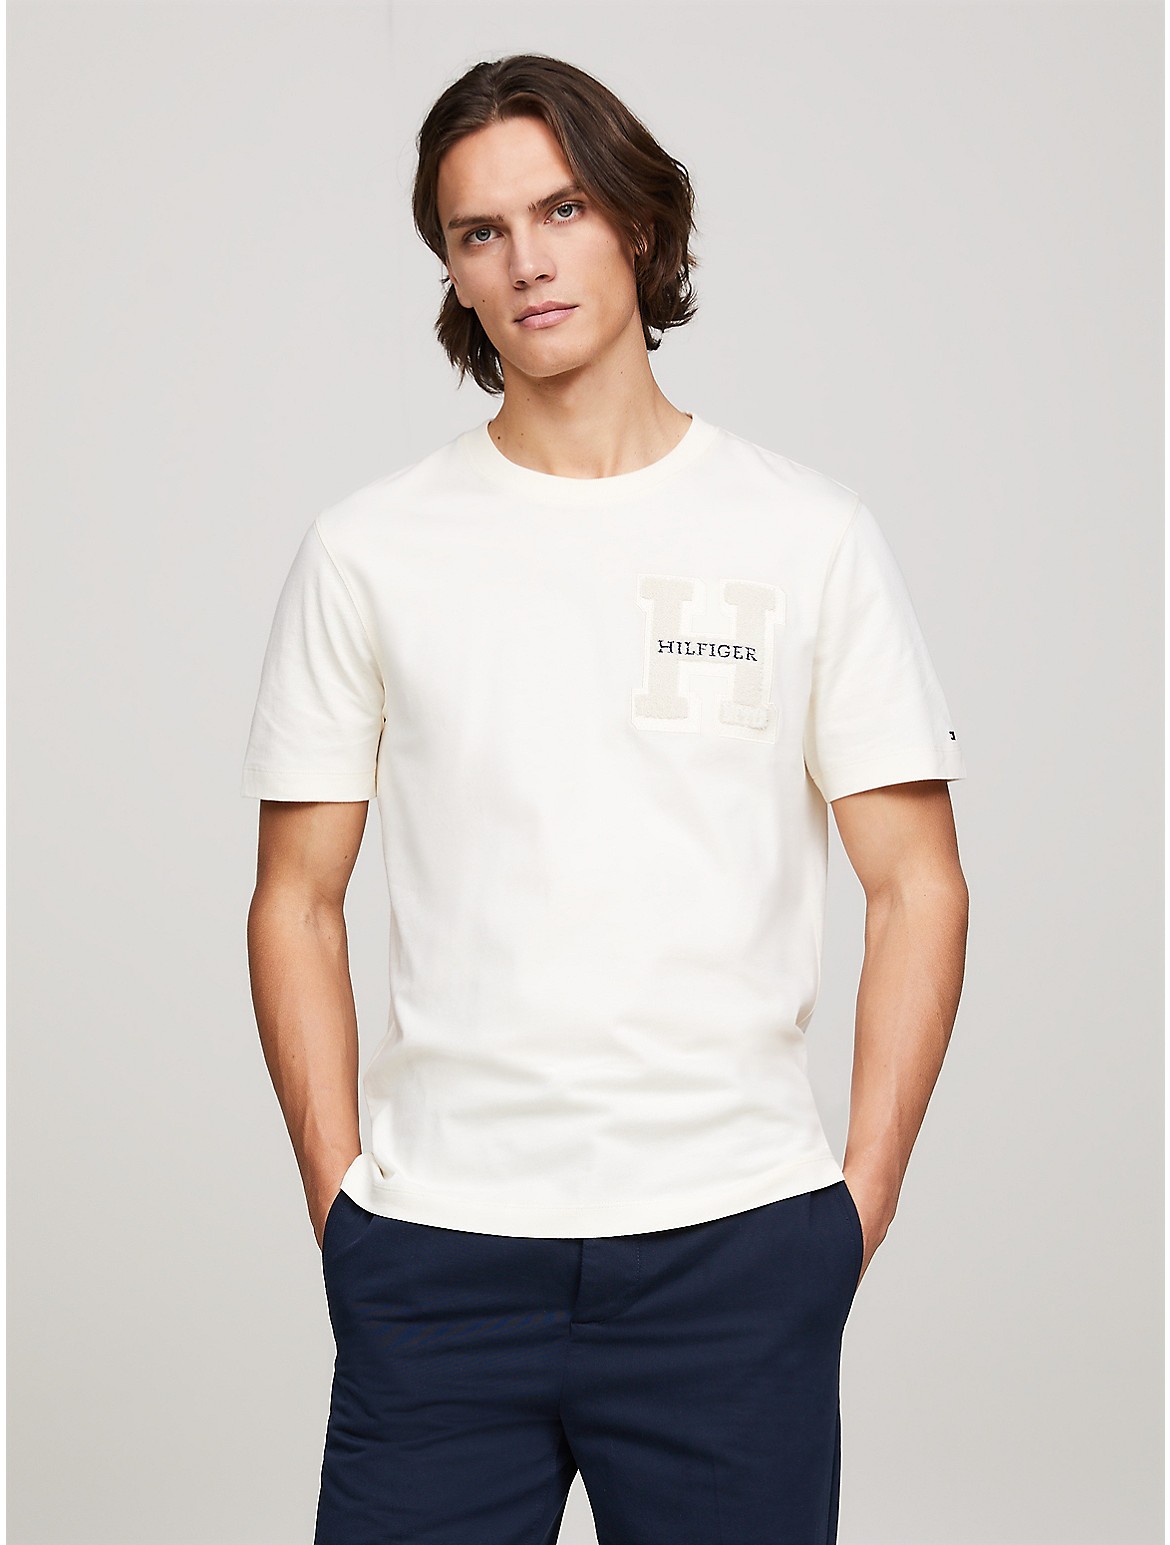 Tommy Hilfiger Men's Embroidered Patch T-Shirt